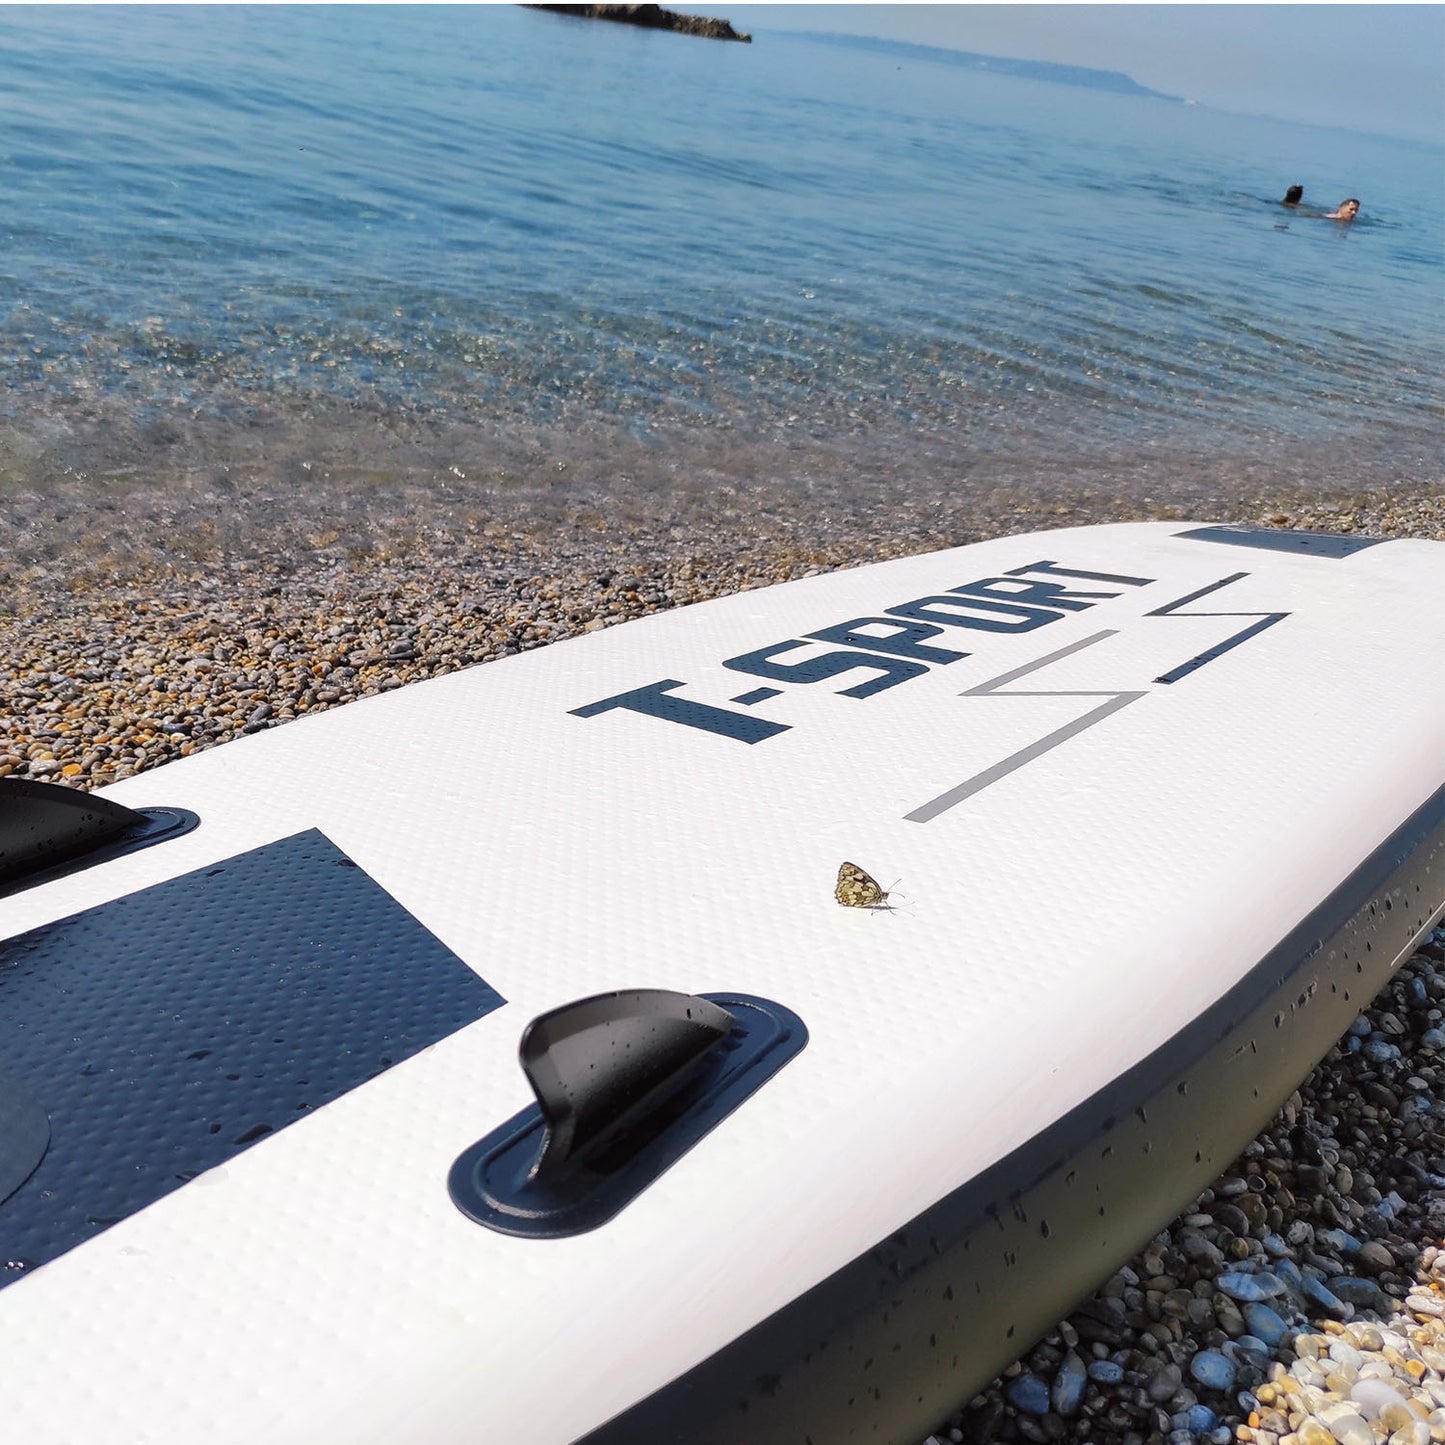 10'6" Black Wing Inflatable Paddle Board